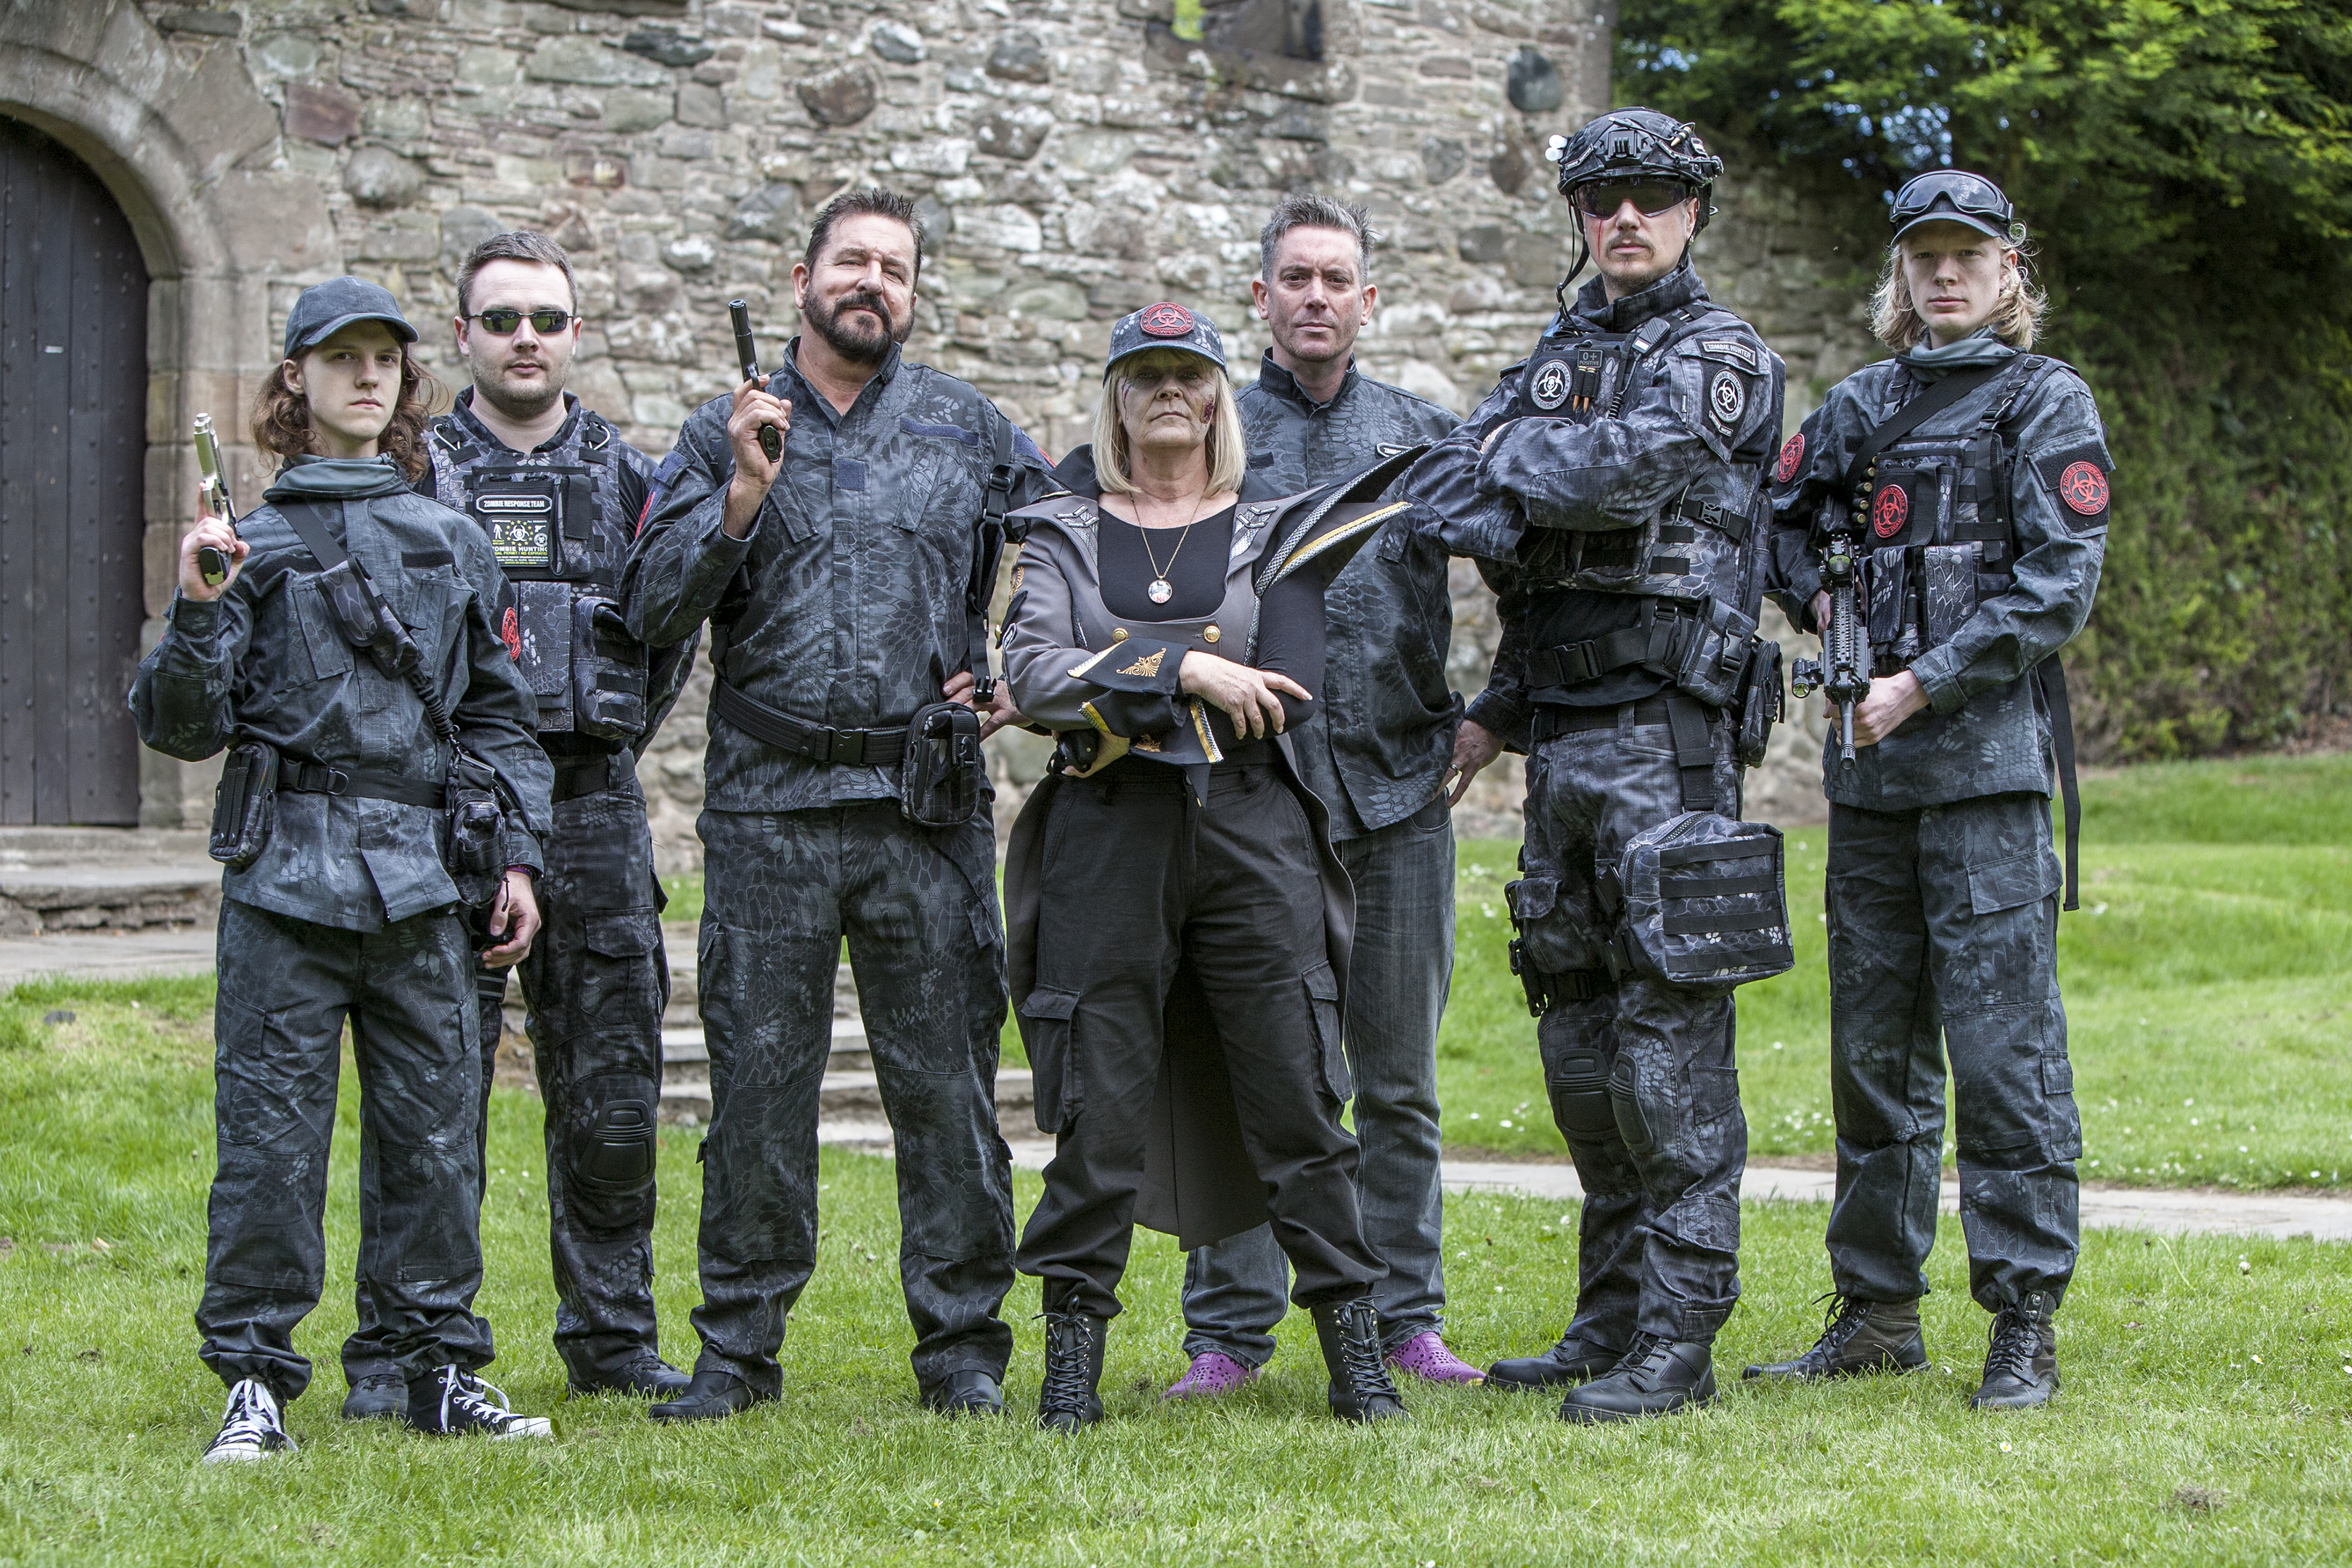 The Zombie Outreach Response Team from last year's event.